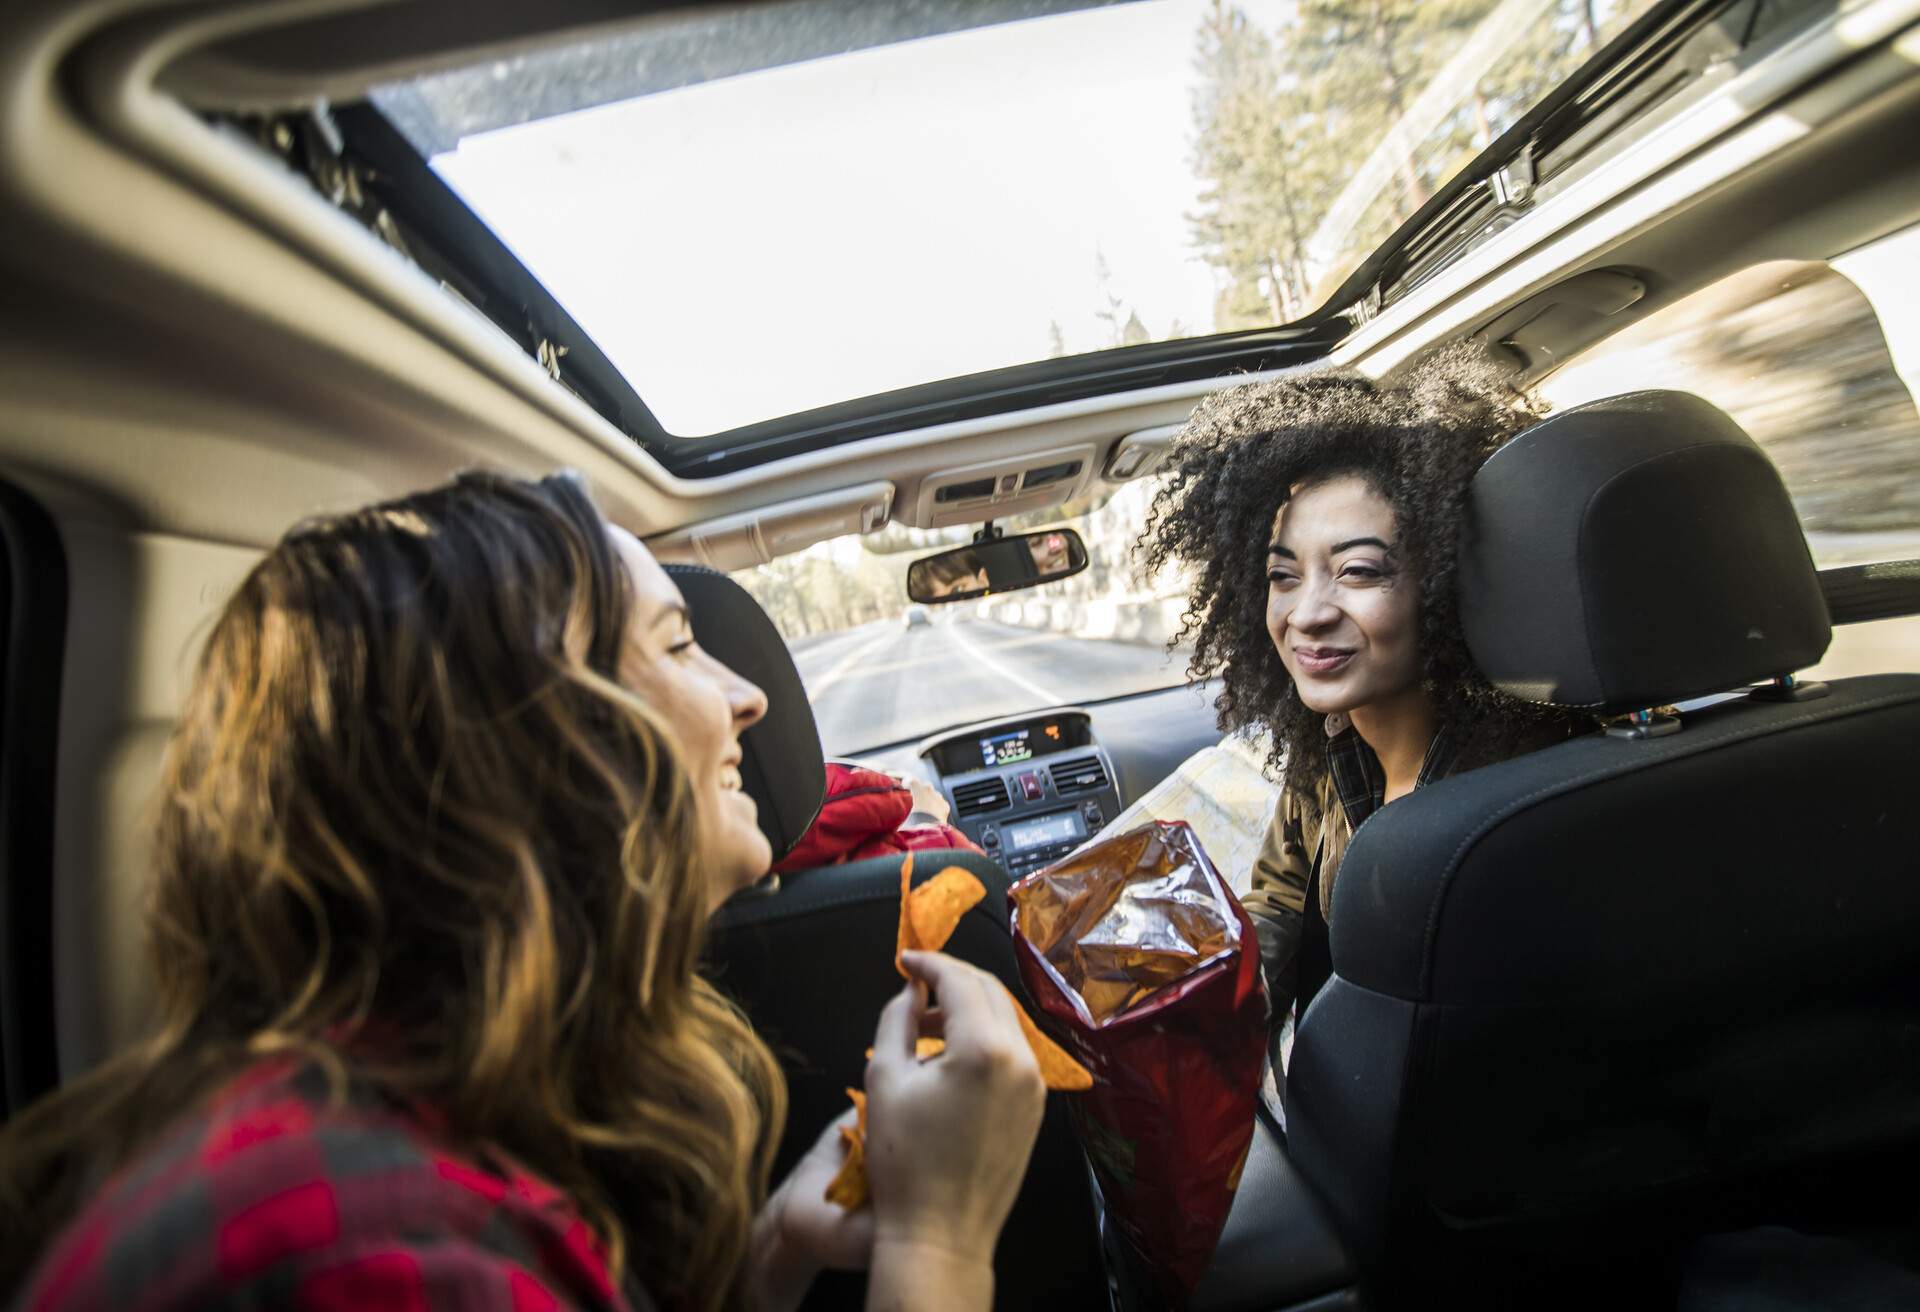 theme_car_roadtrip_people_friends_food_gettyimages-722214949_universal_within-usage-period_83131